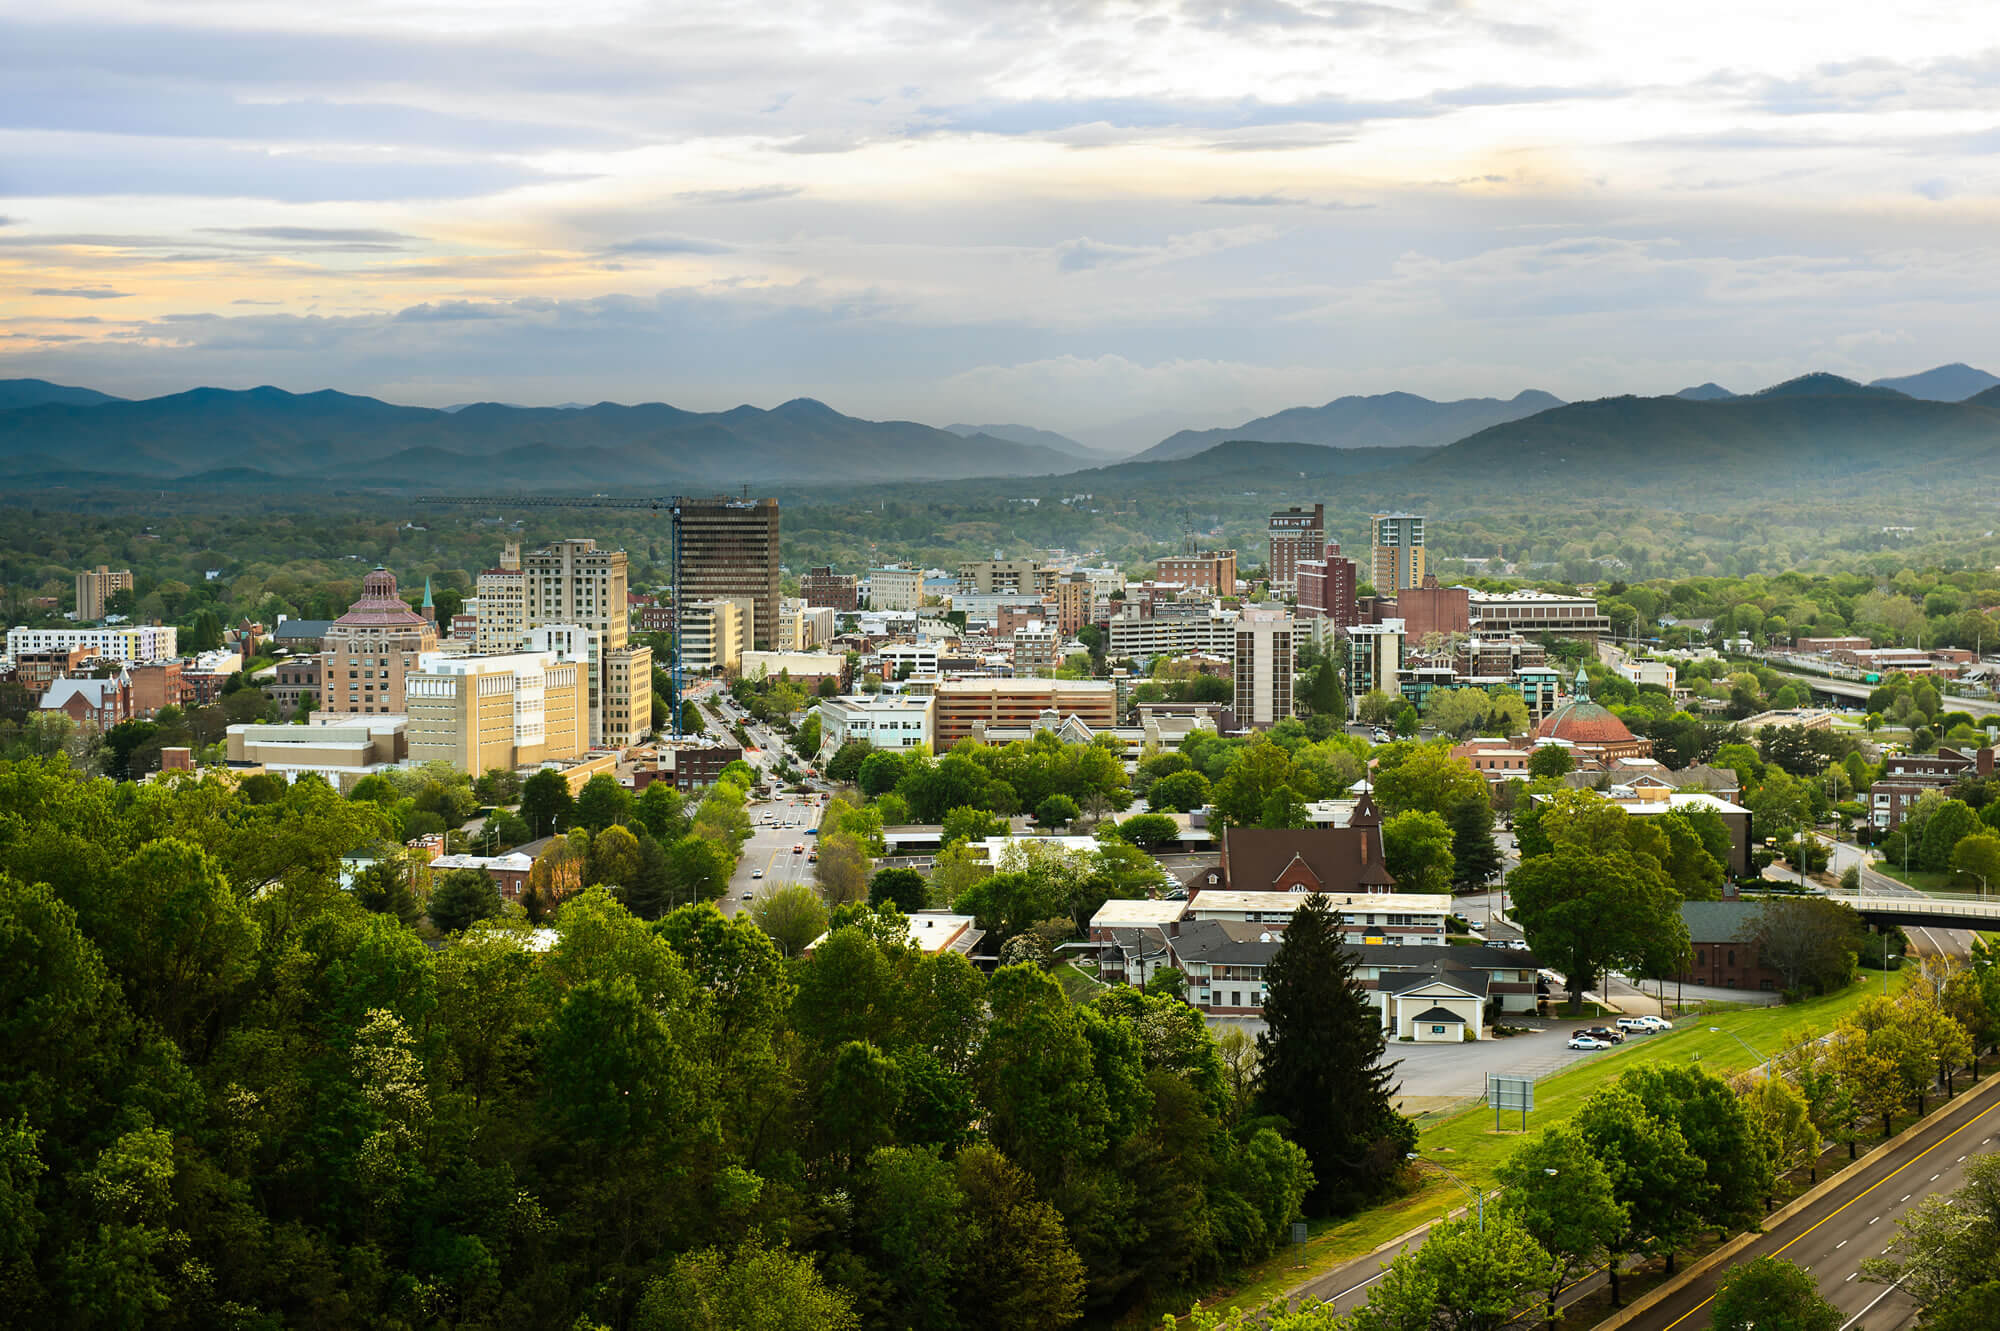 The skyline of downtown Asheville